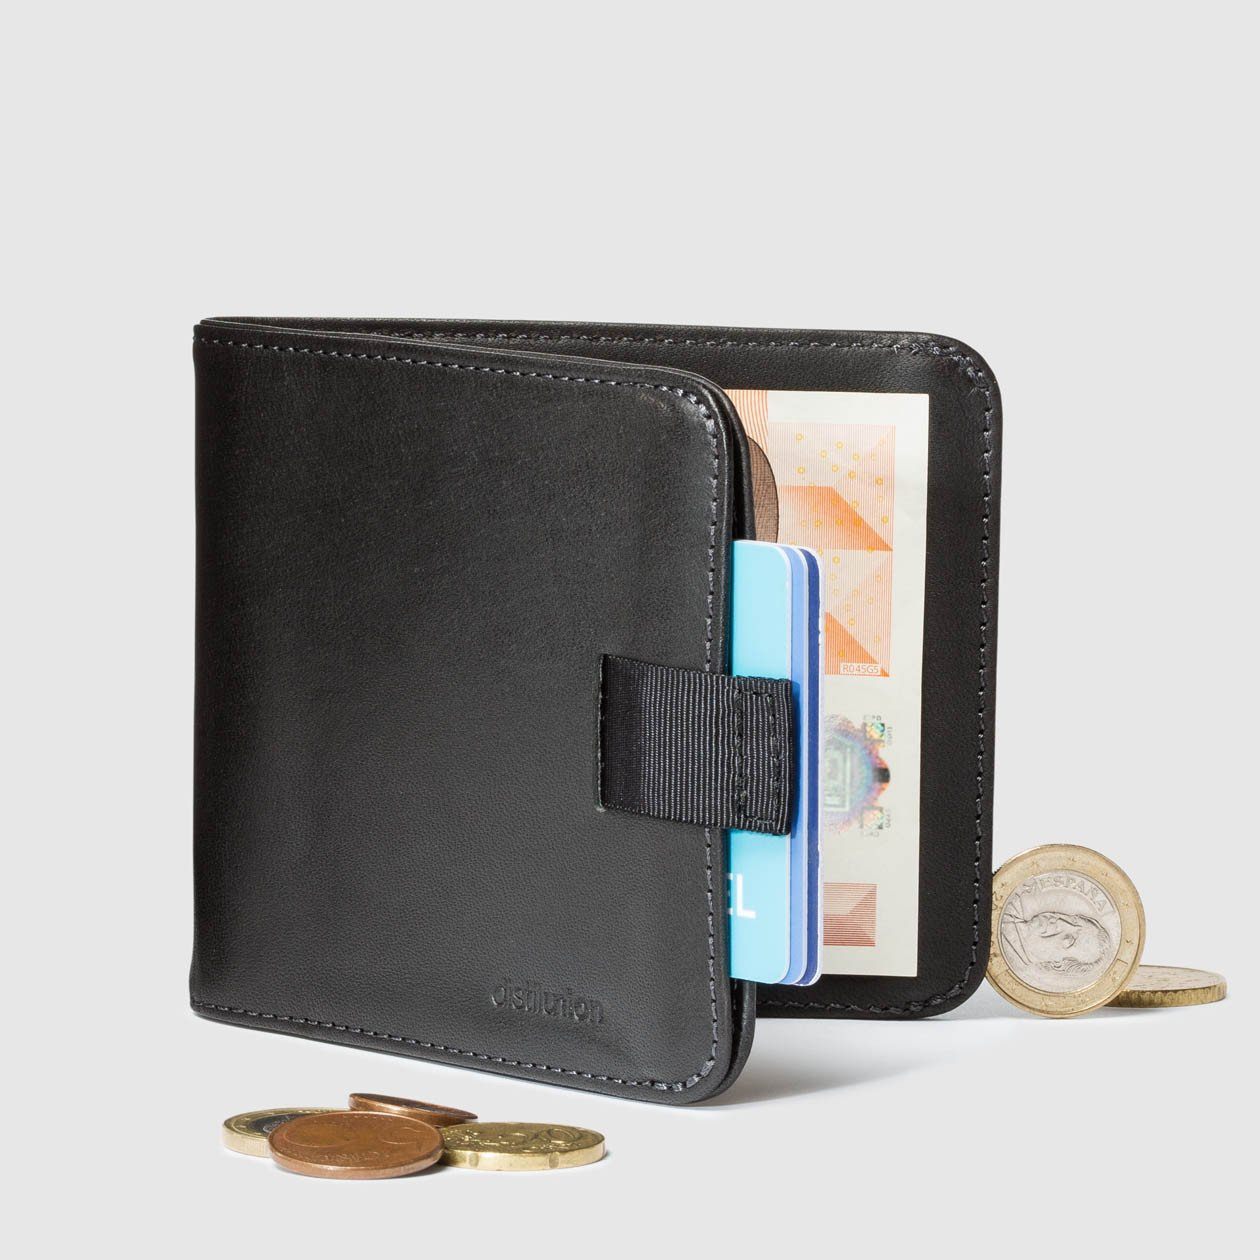 coins around distil black leather bifold travel wallet half open with pull-tab